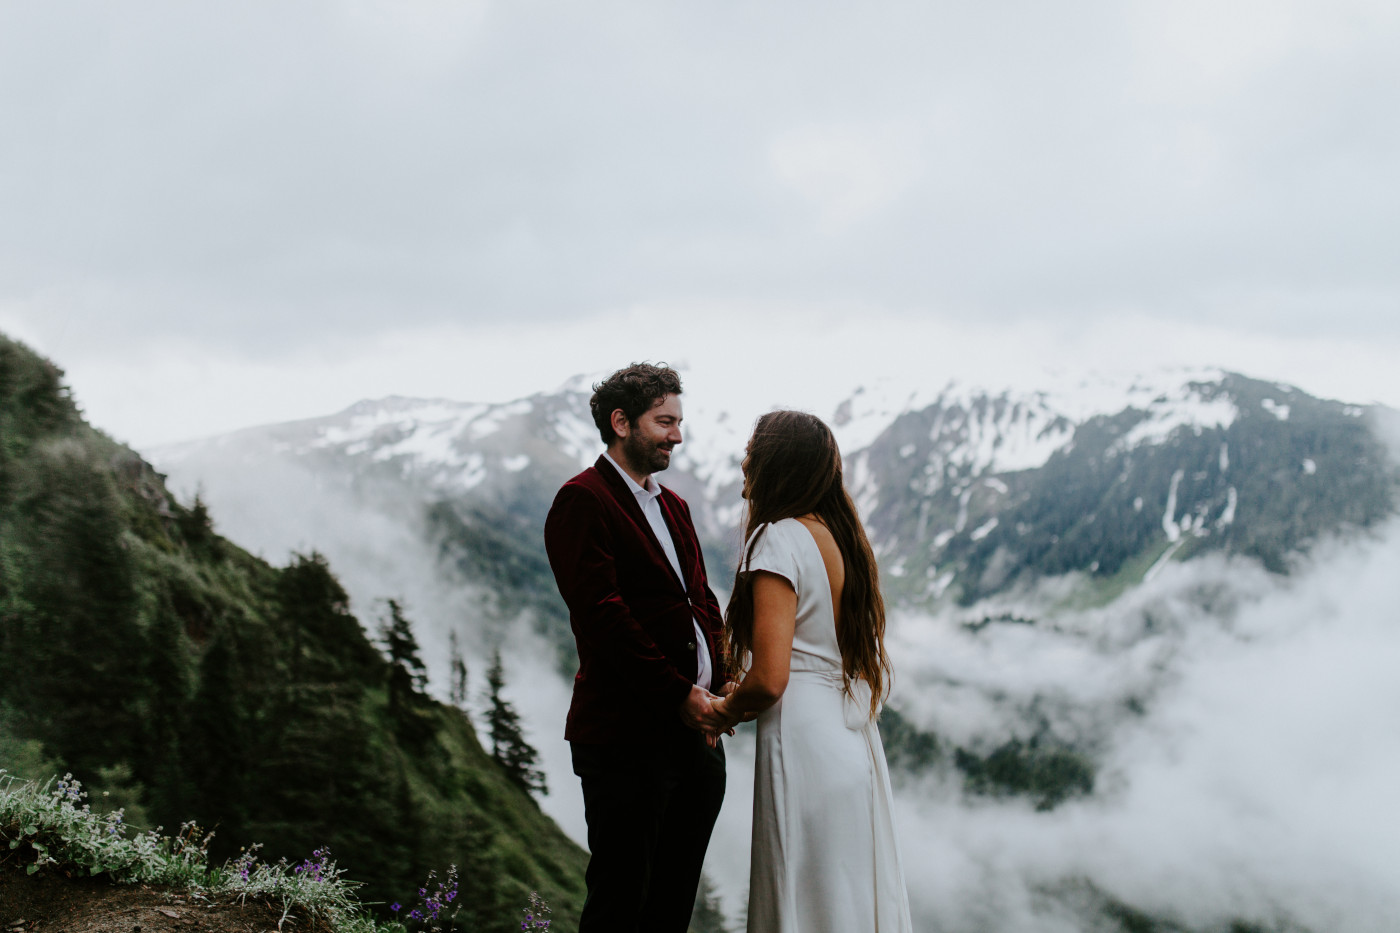 Murray and Katelyn stand in front of Mount Hood. Elopement wedding photography at Mount Hood by Sienna Plus Josh.